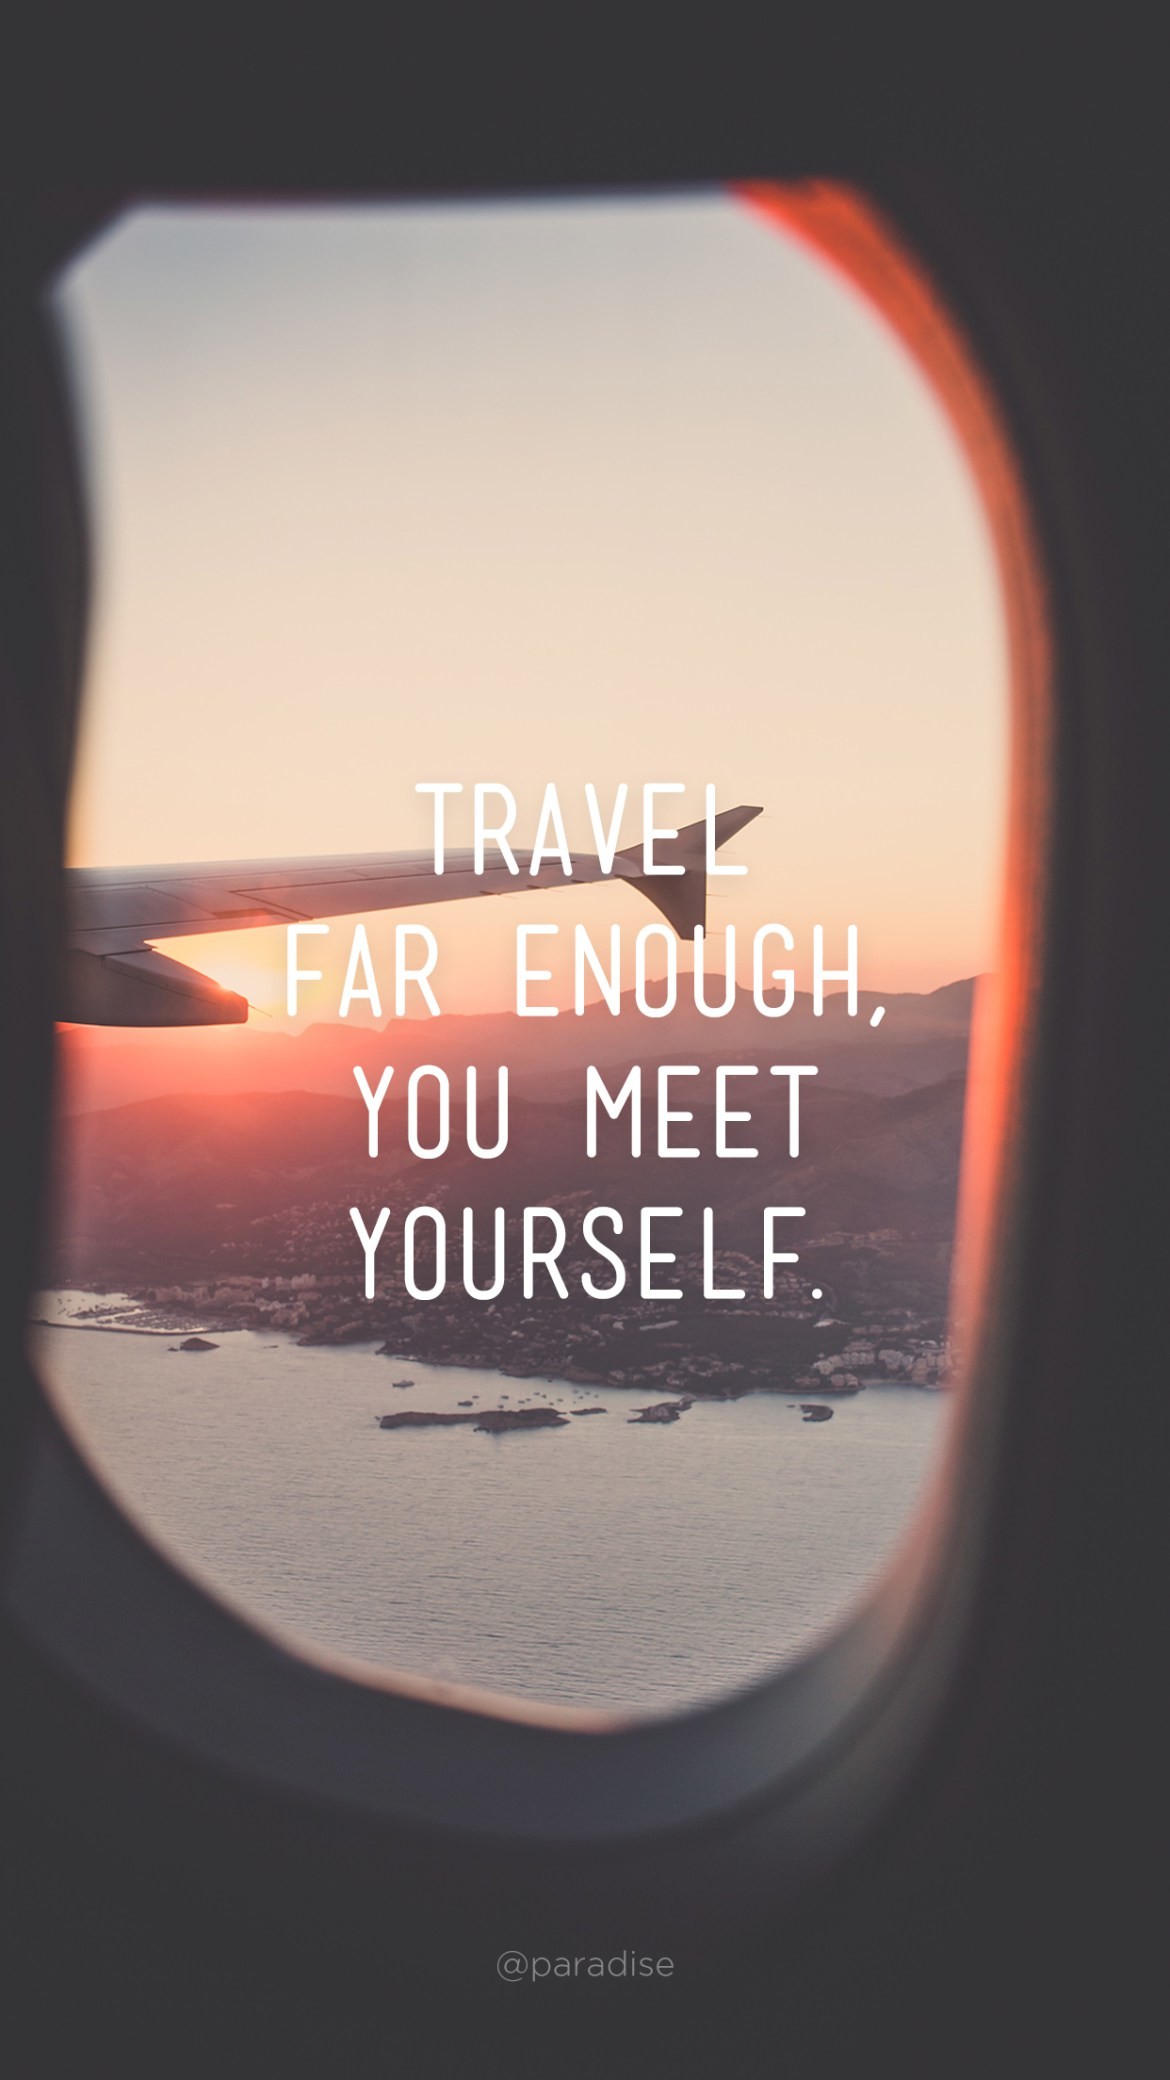 1170x2080 15 Beautiful iPhone Wallpapers with Travel Quotes | Via Paradise